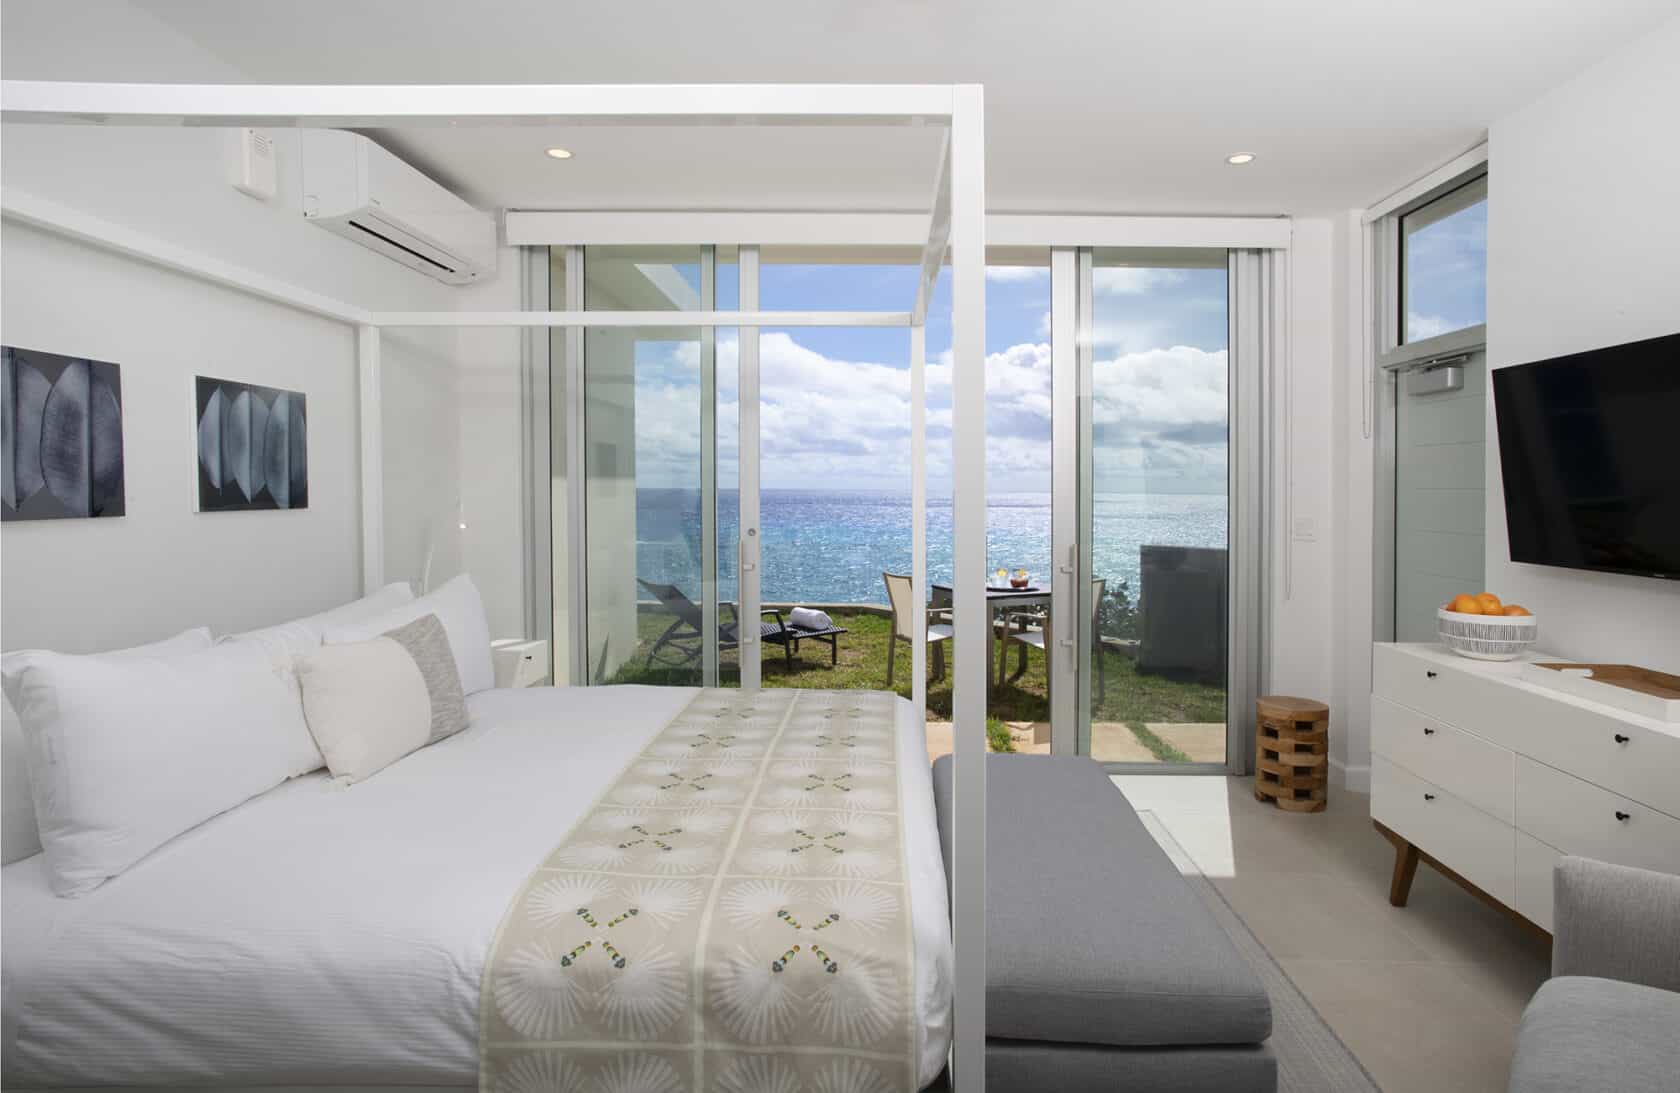 A white bedroom with a view of the ocean, perfect for a bermuda vacation rental.